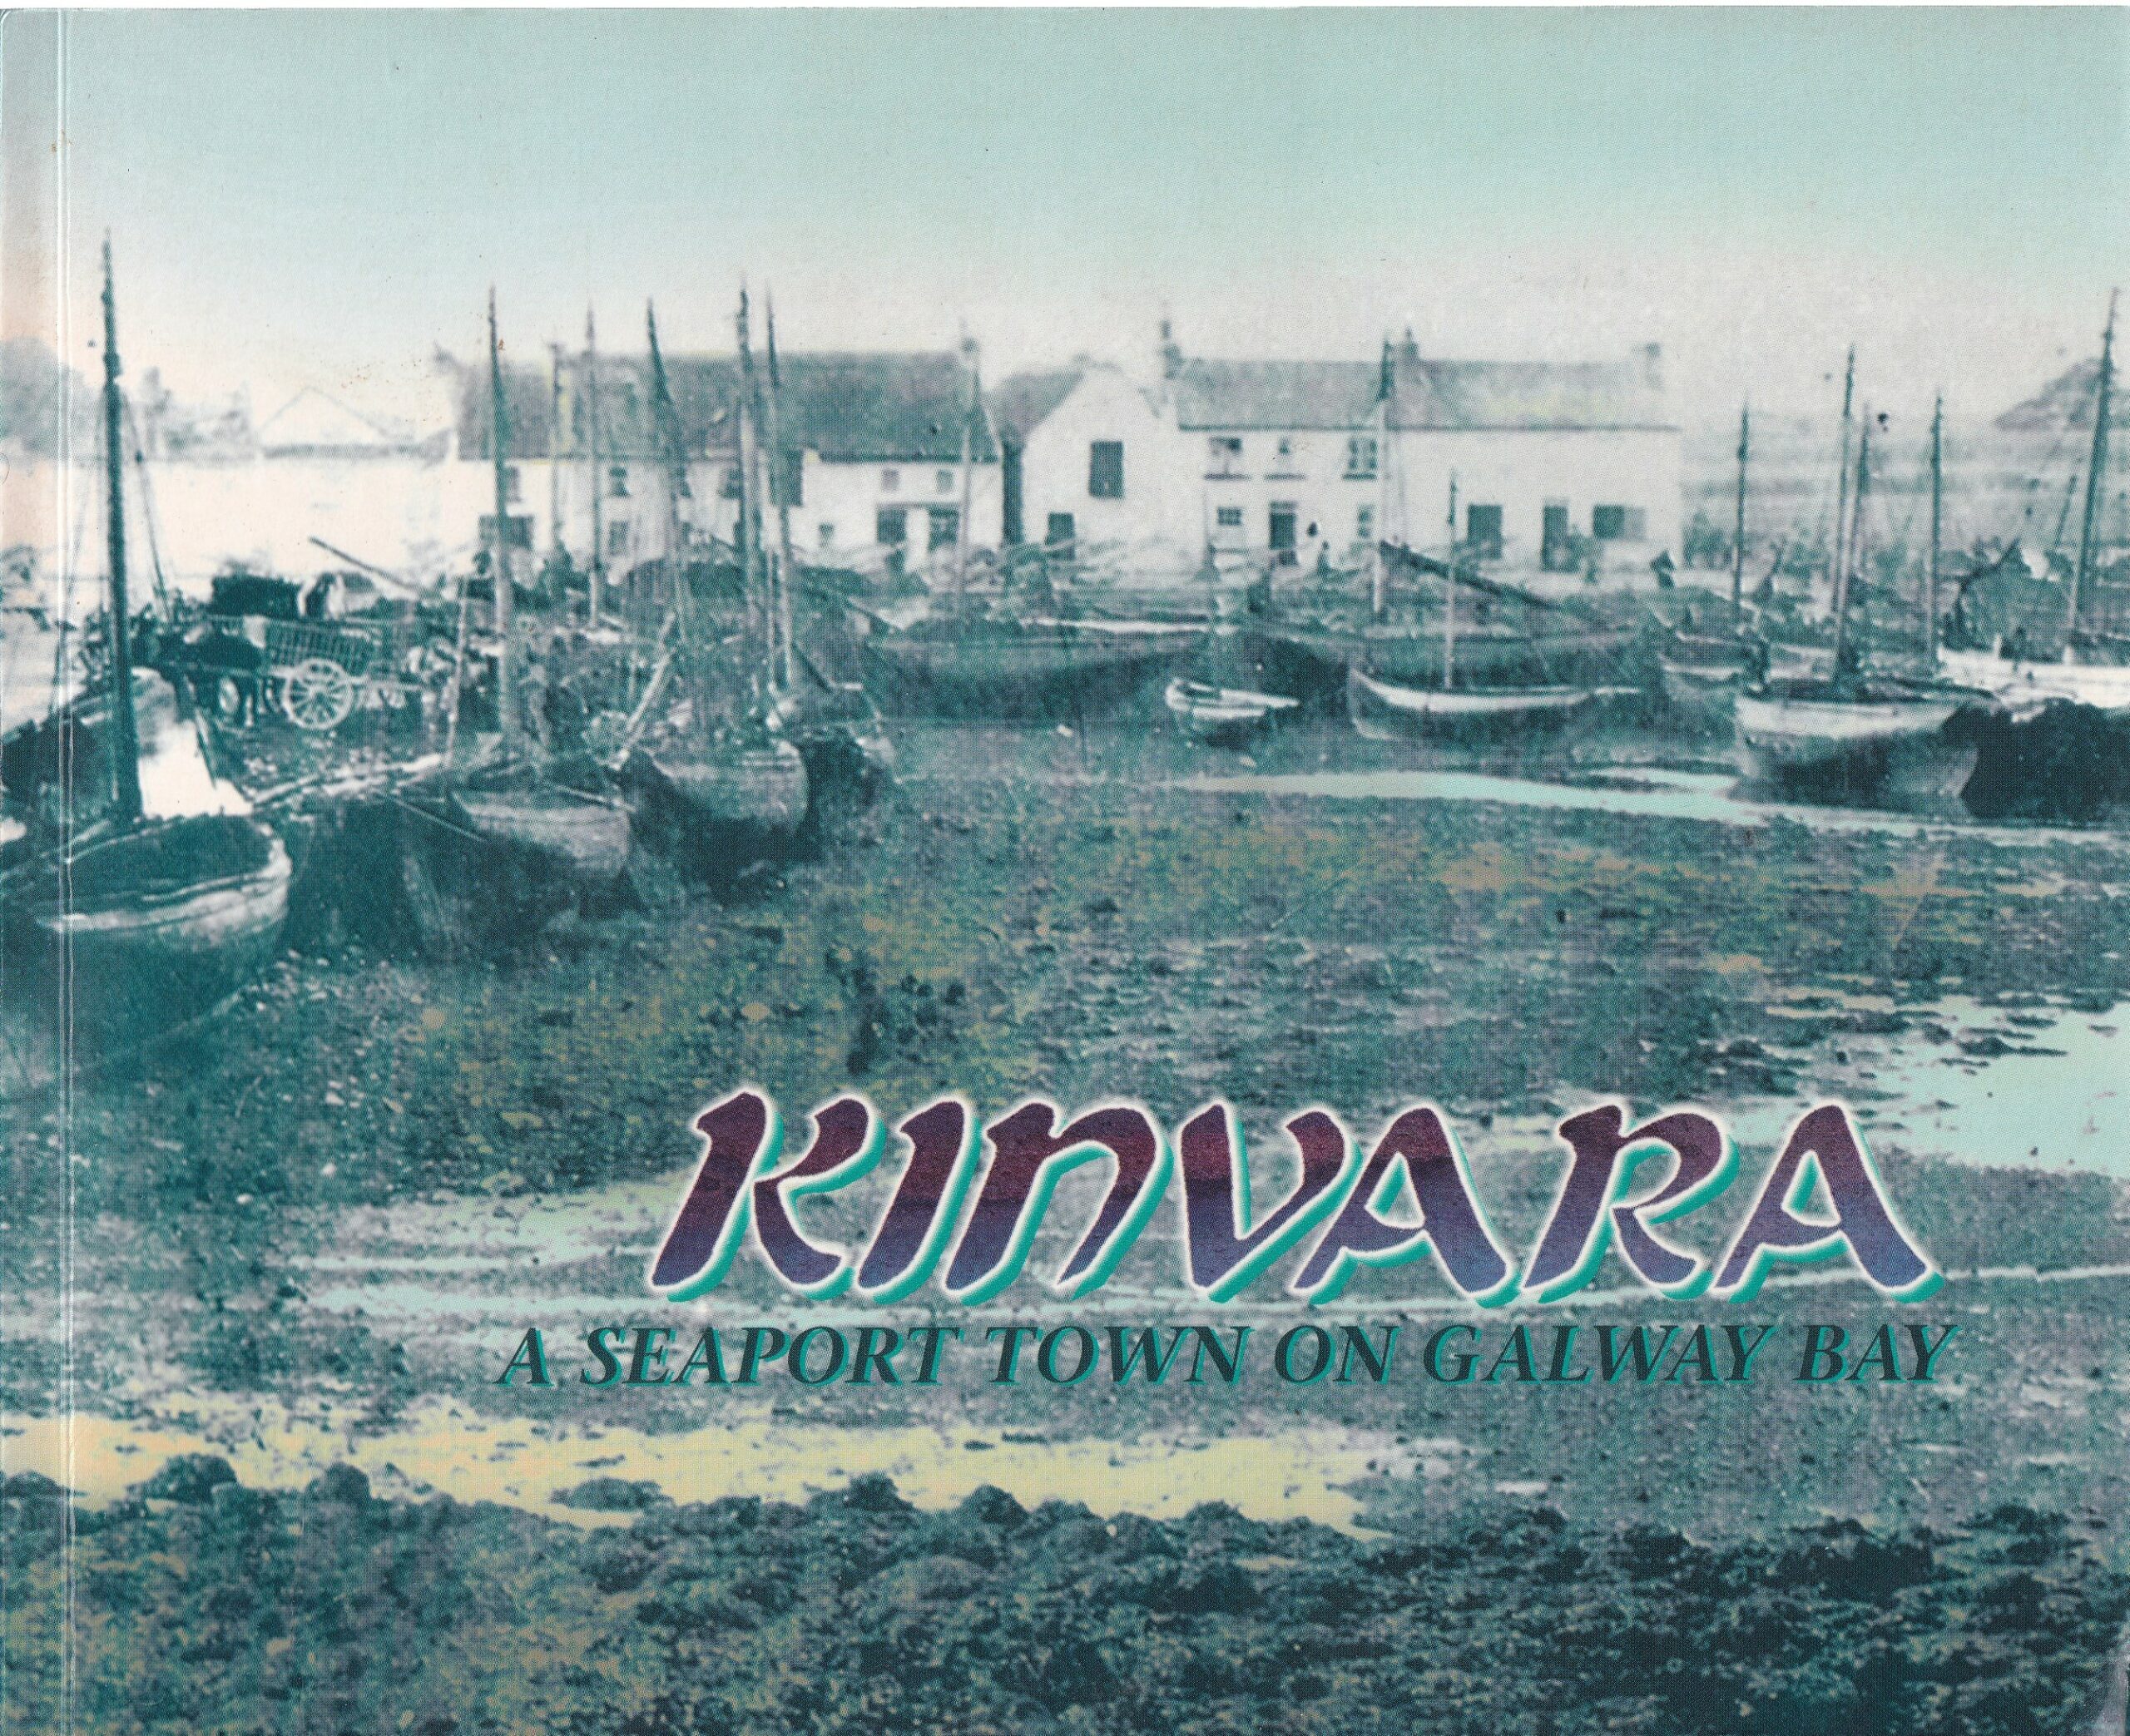 Kinvara: A Seaport Town on Galway Bay by Caoilte Nreatnach,